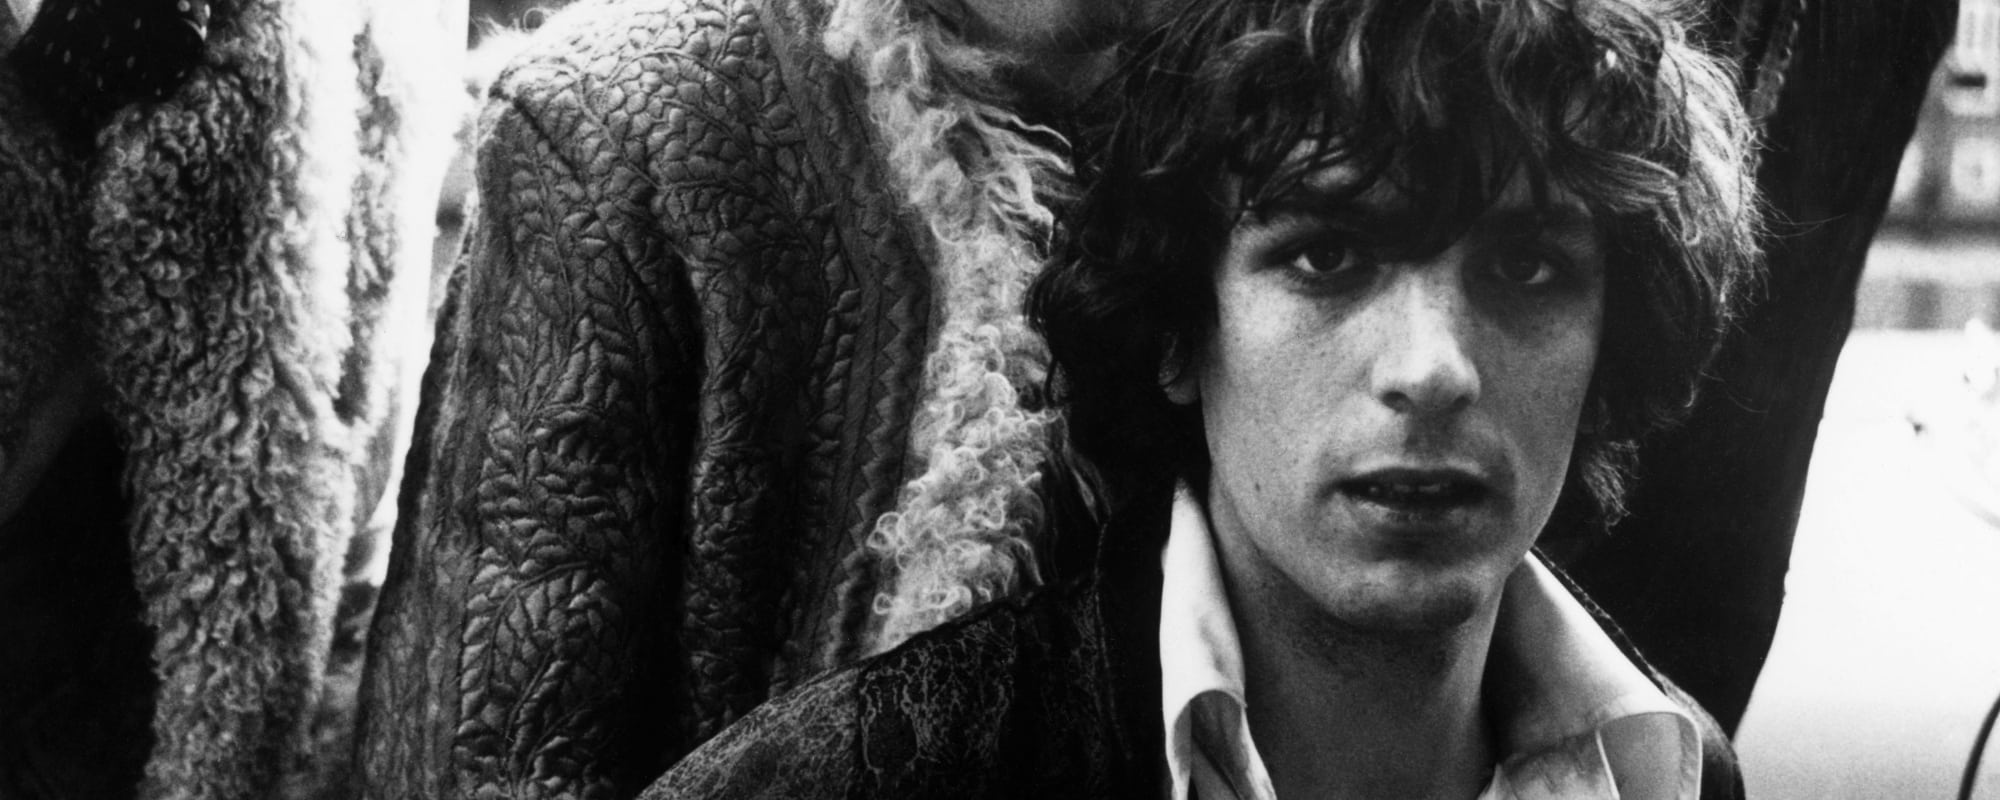 Russell Beecher Discusses His New Book on Legendary Pink Floyd Founder Syd Barrett